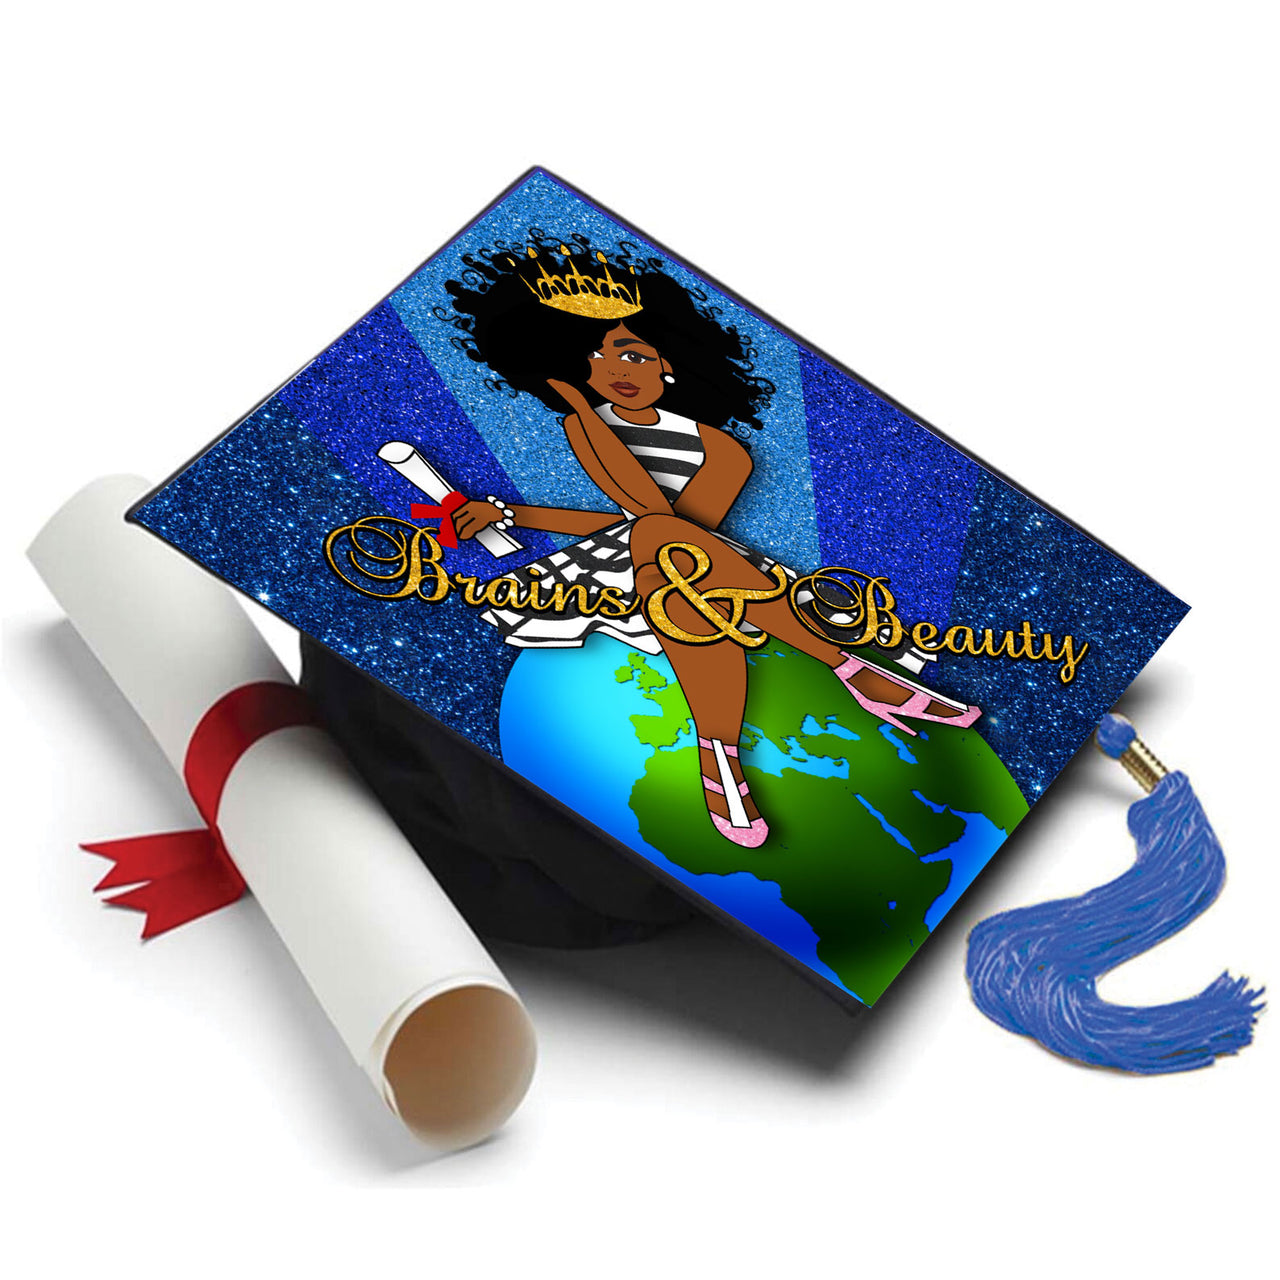 Graduation Cap Topper ™  - Black Queen - Brains and Beauty - Tassel Topper - Tassel Toppers - Professionally Decorated Grad Caps